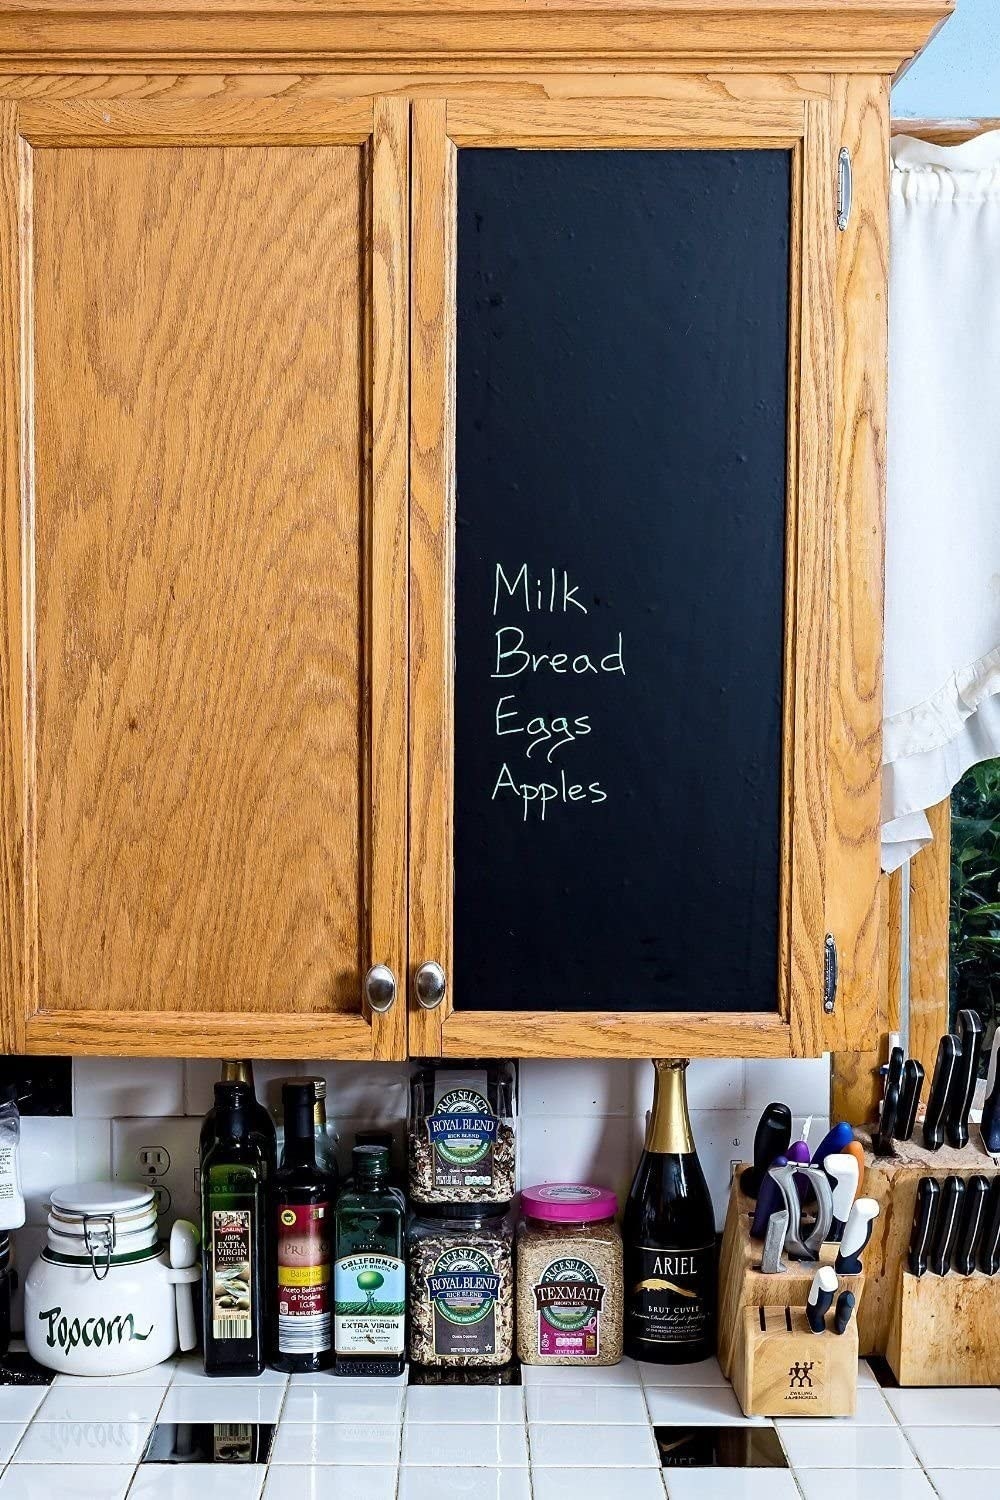 A cabinet door with the chalk adhered to it with milk eggs bread and apples written on it